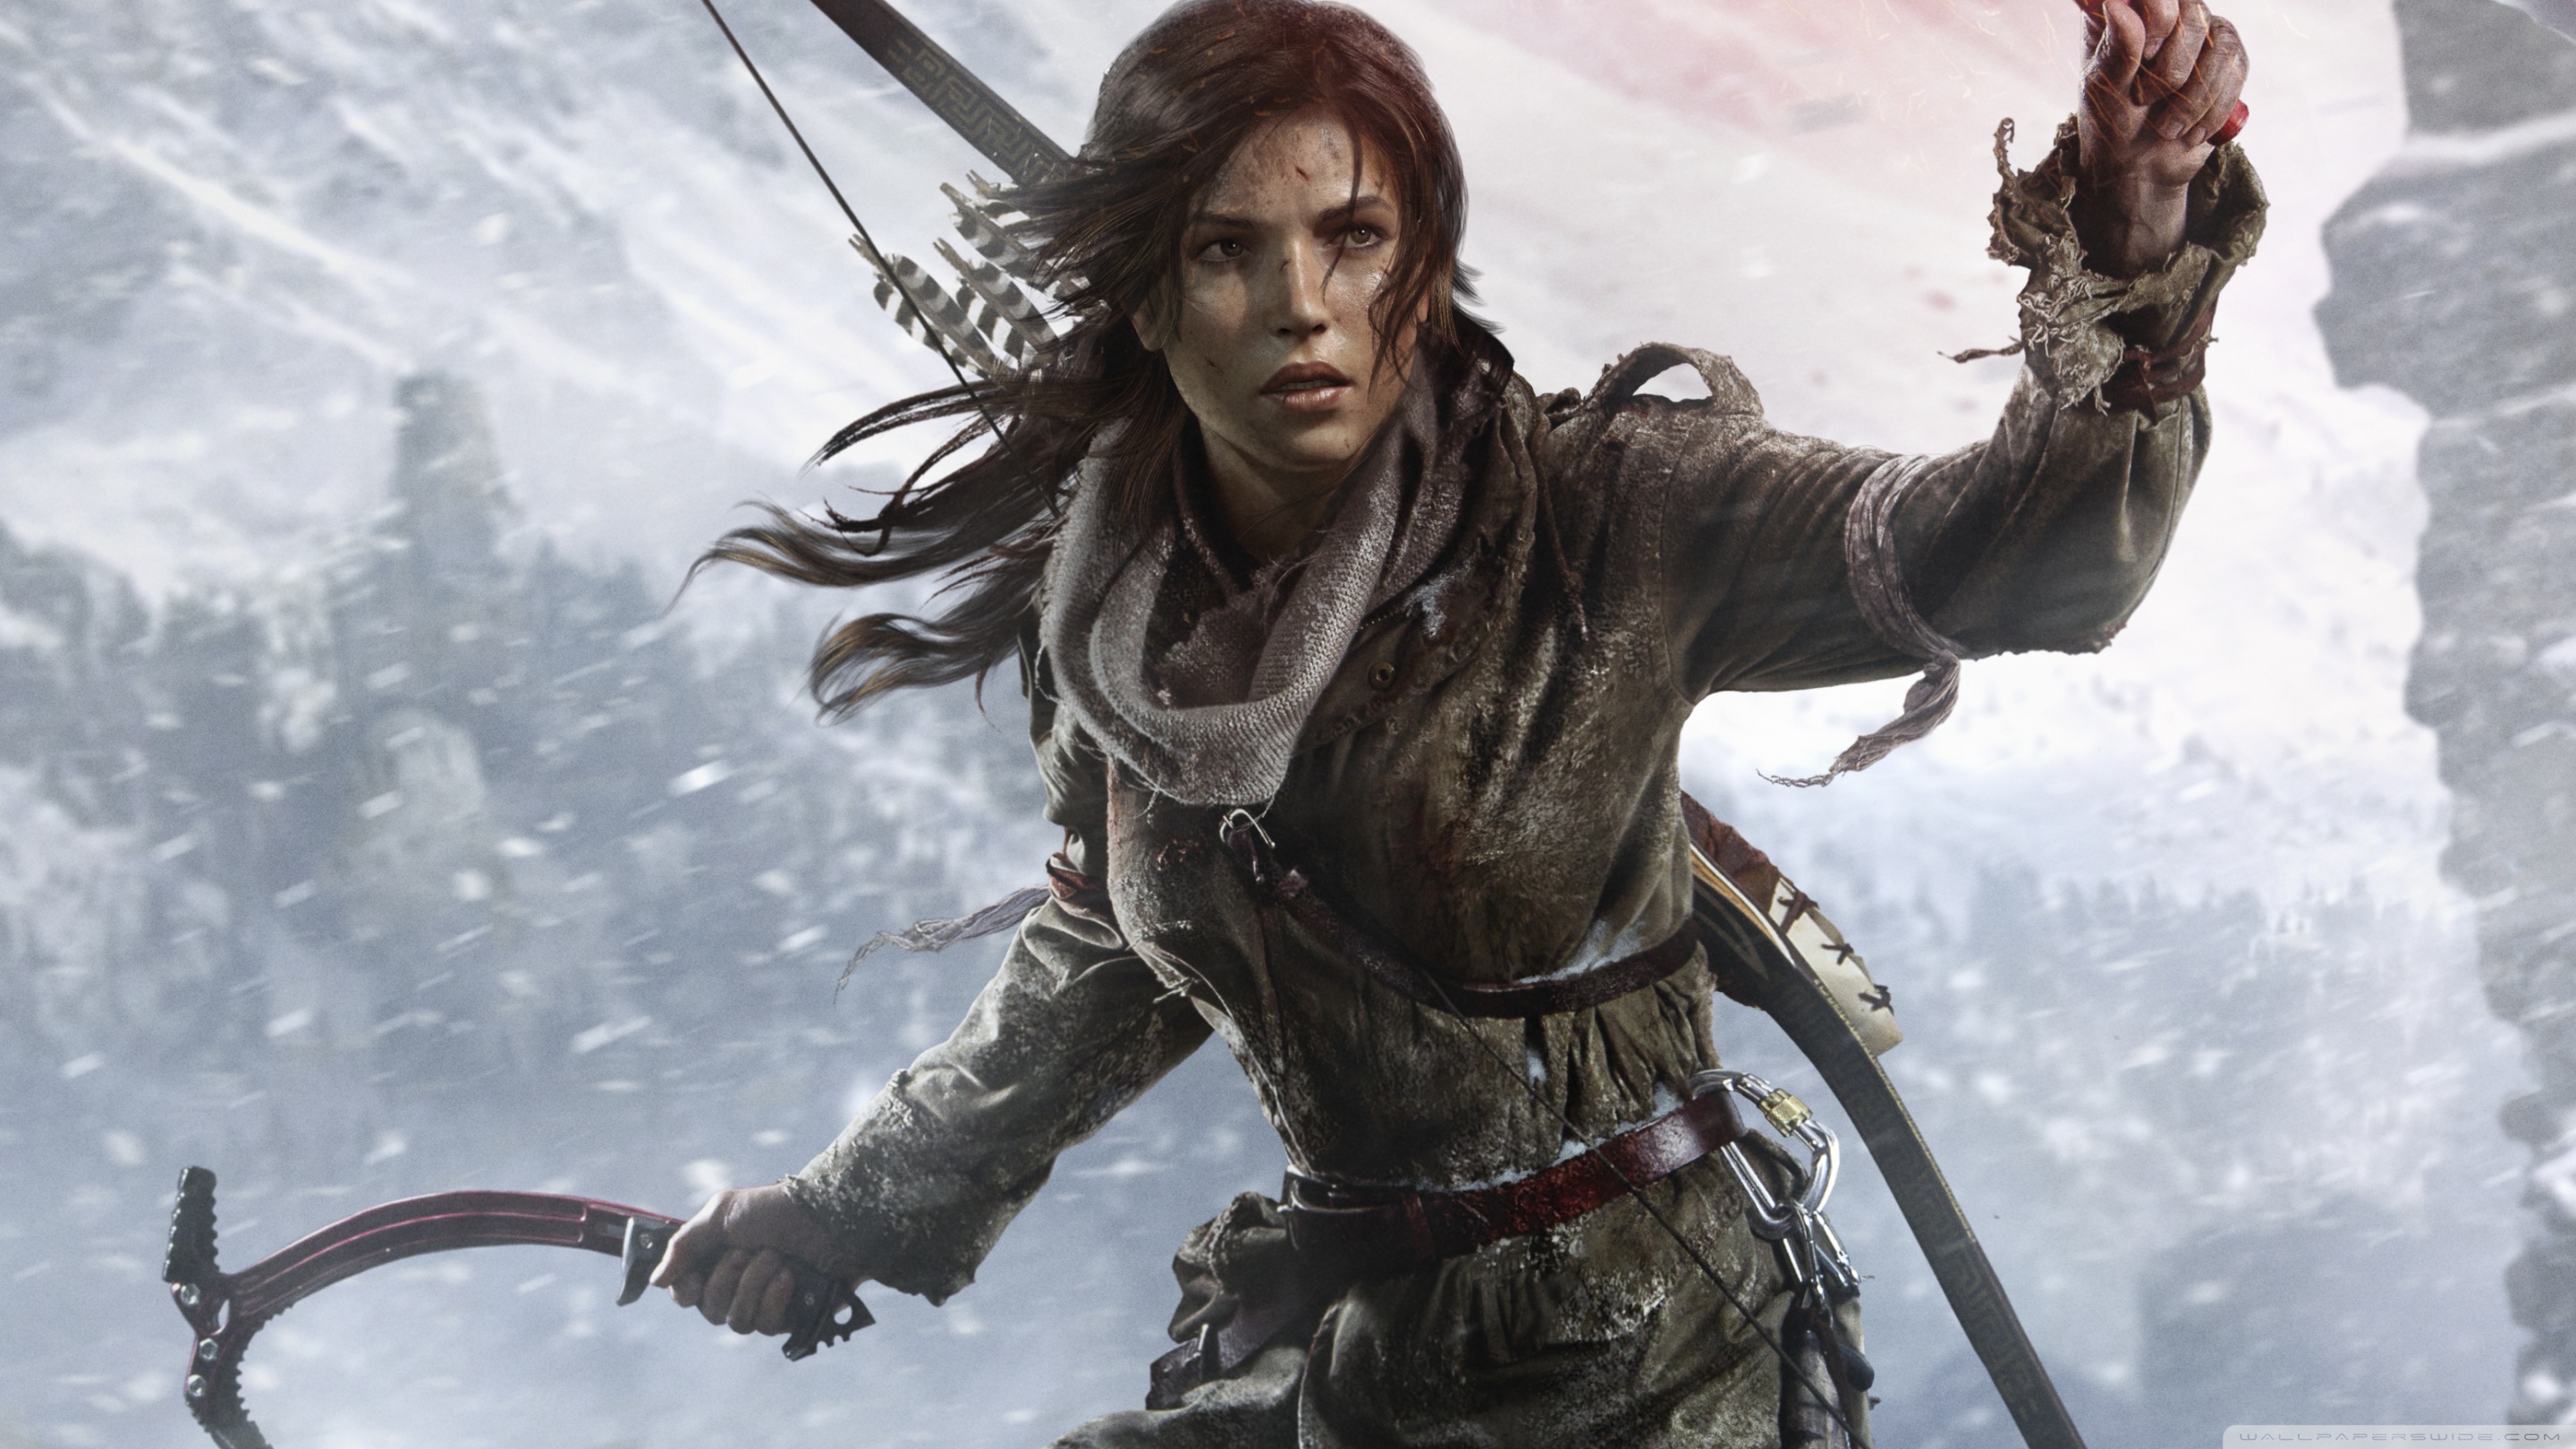 rise of the tomb raider wallpaper,action adventure game,pc game,cg artwork,games,adventure game